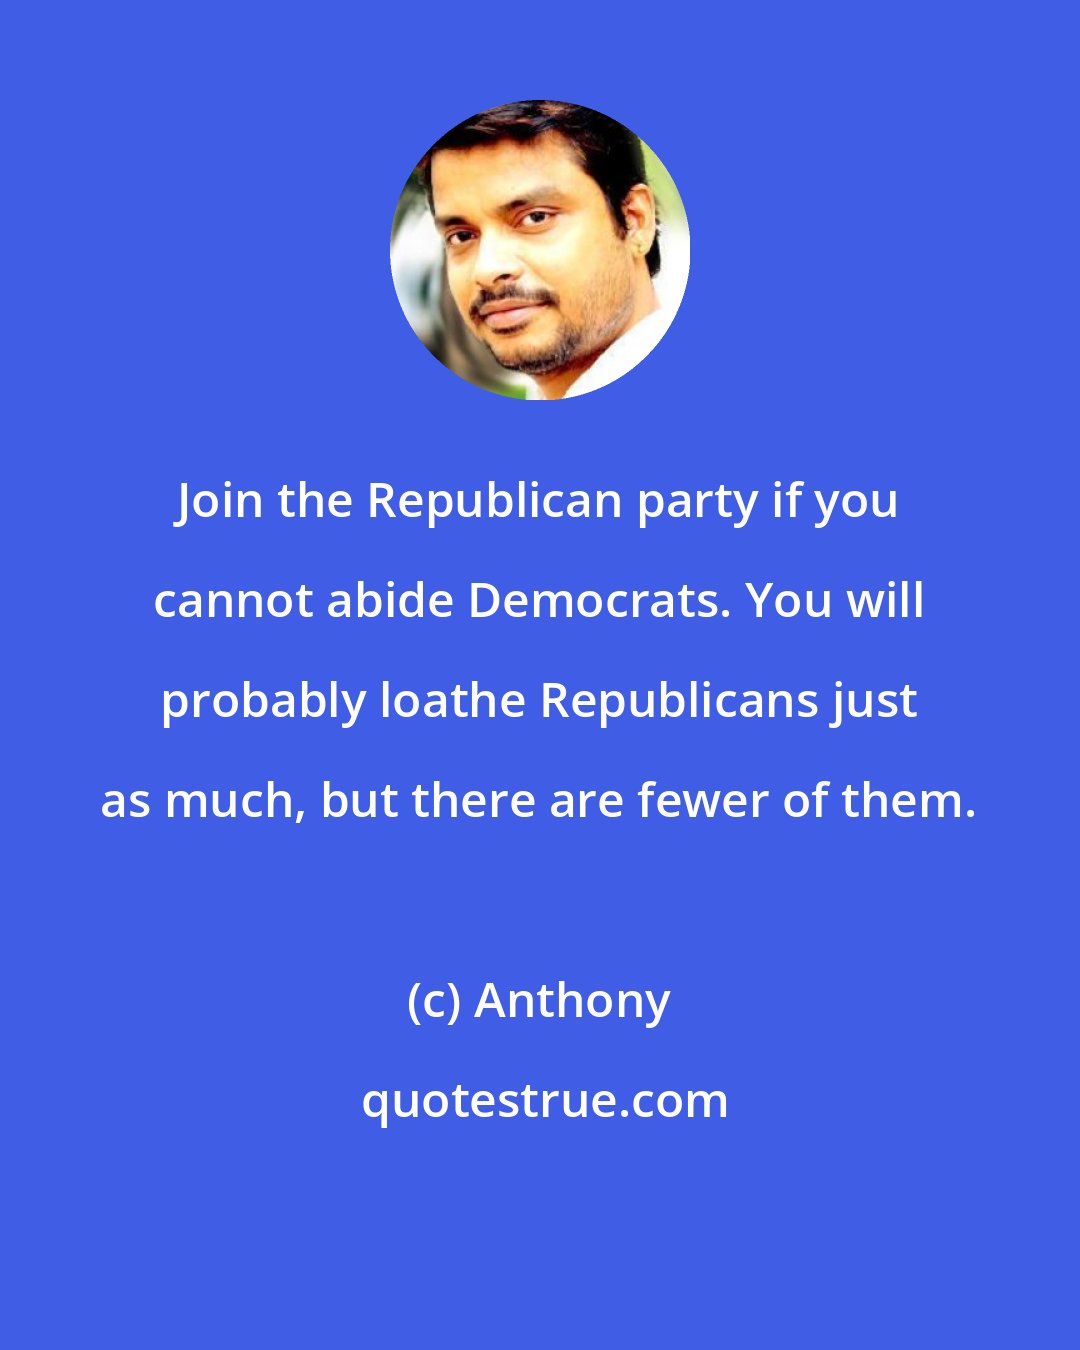 Anthony: Join the Republican party if you cannot abide Democrats. You will probably loathe Republicans just as much, but there are fewer of them.